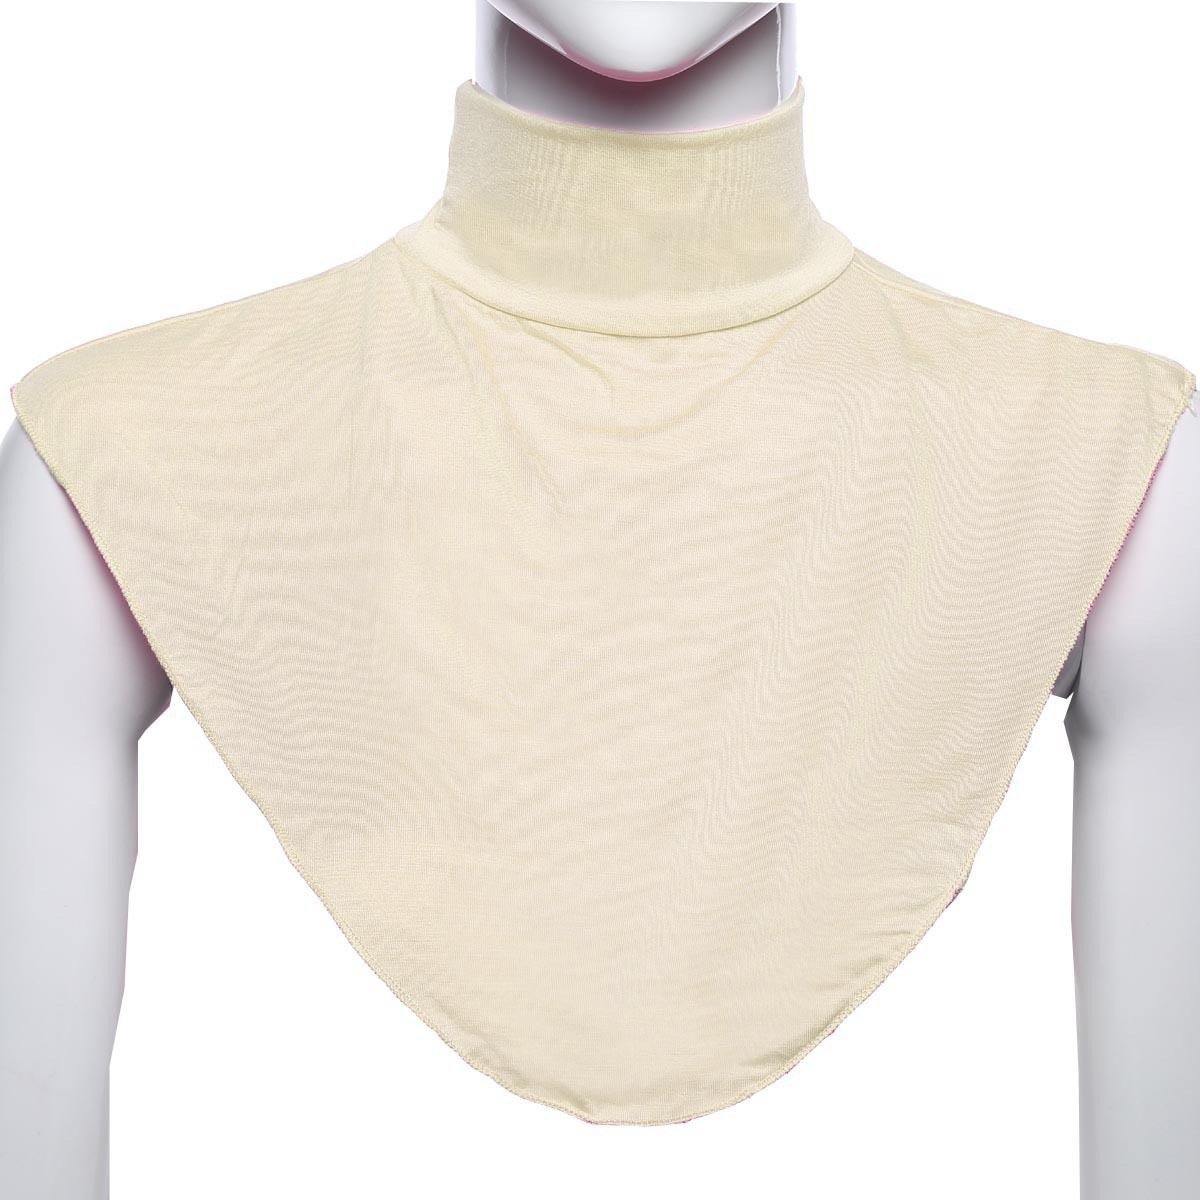 Luxurious Milk Silk Neck Cover - Beige - Divinity Collection